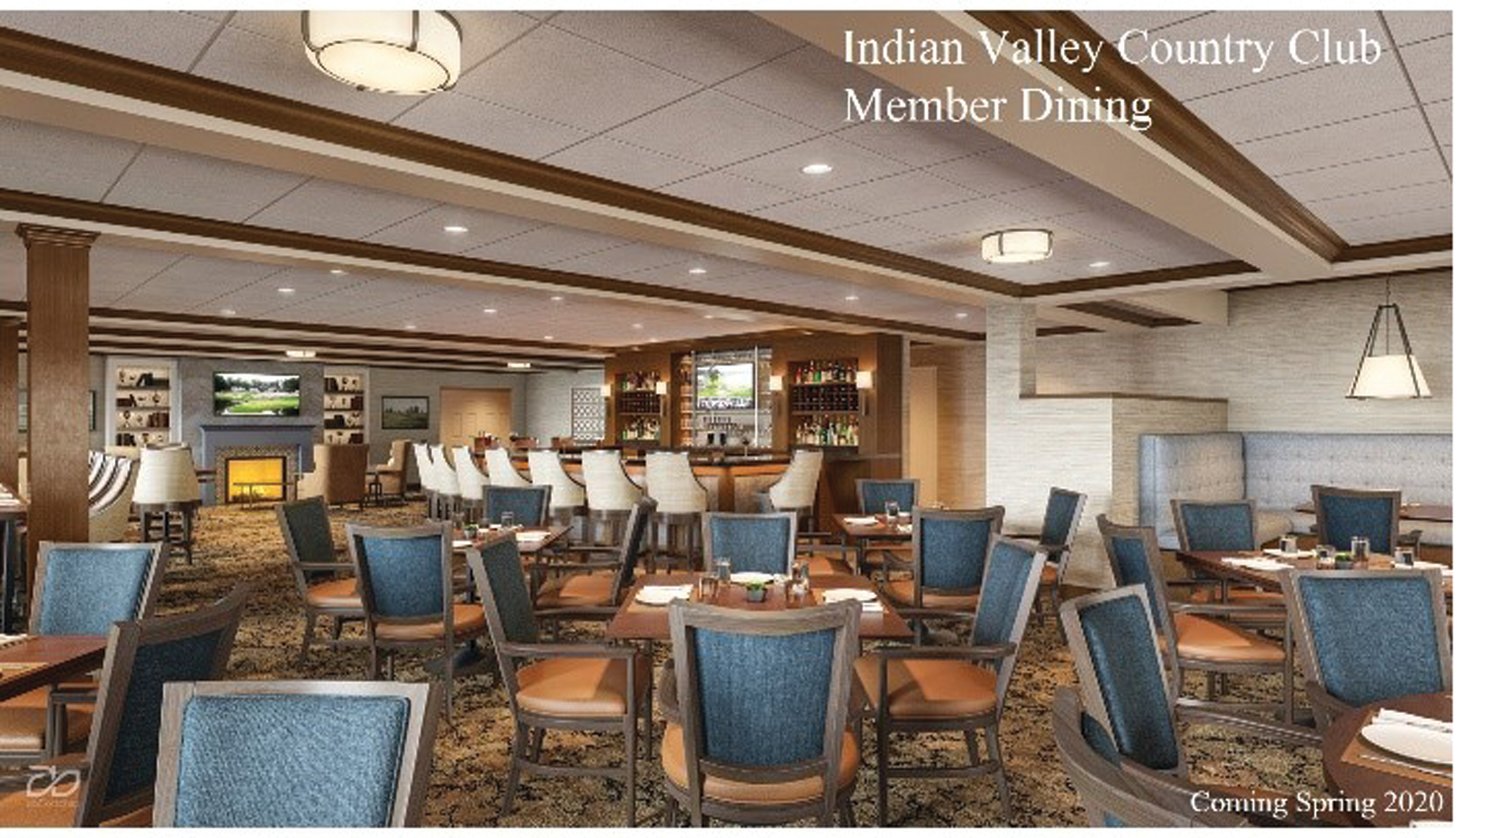 The remodeled dining room at Indian Valley Country Club.